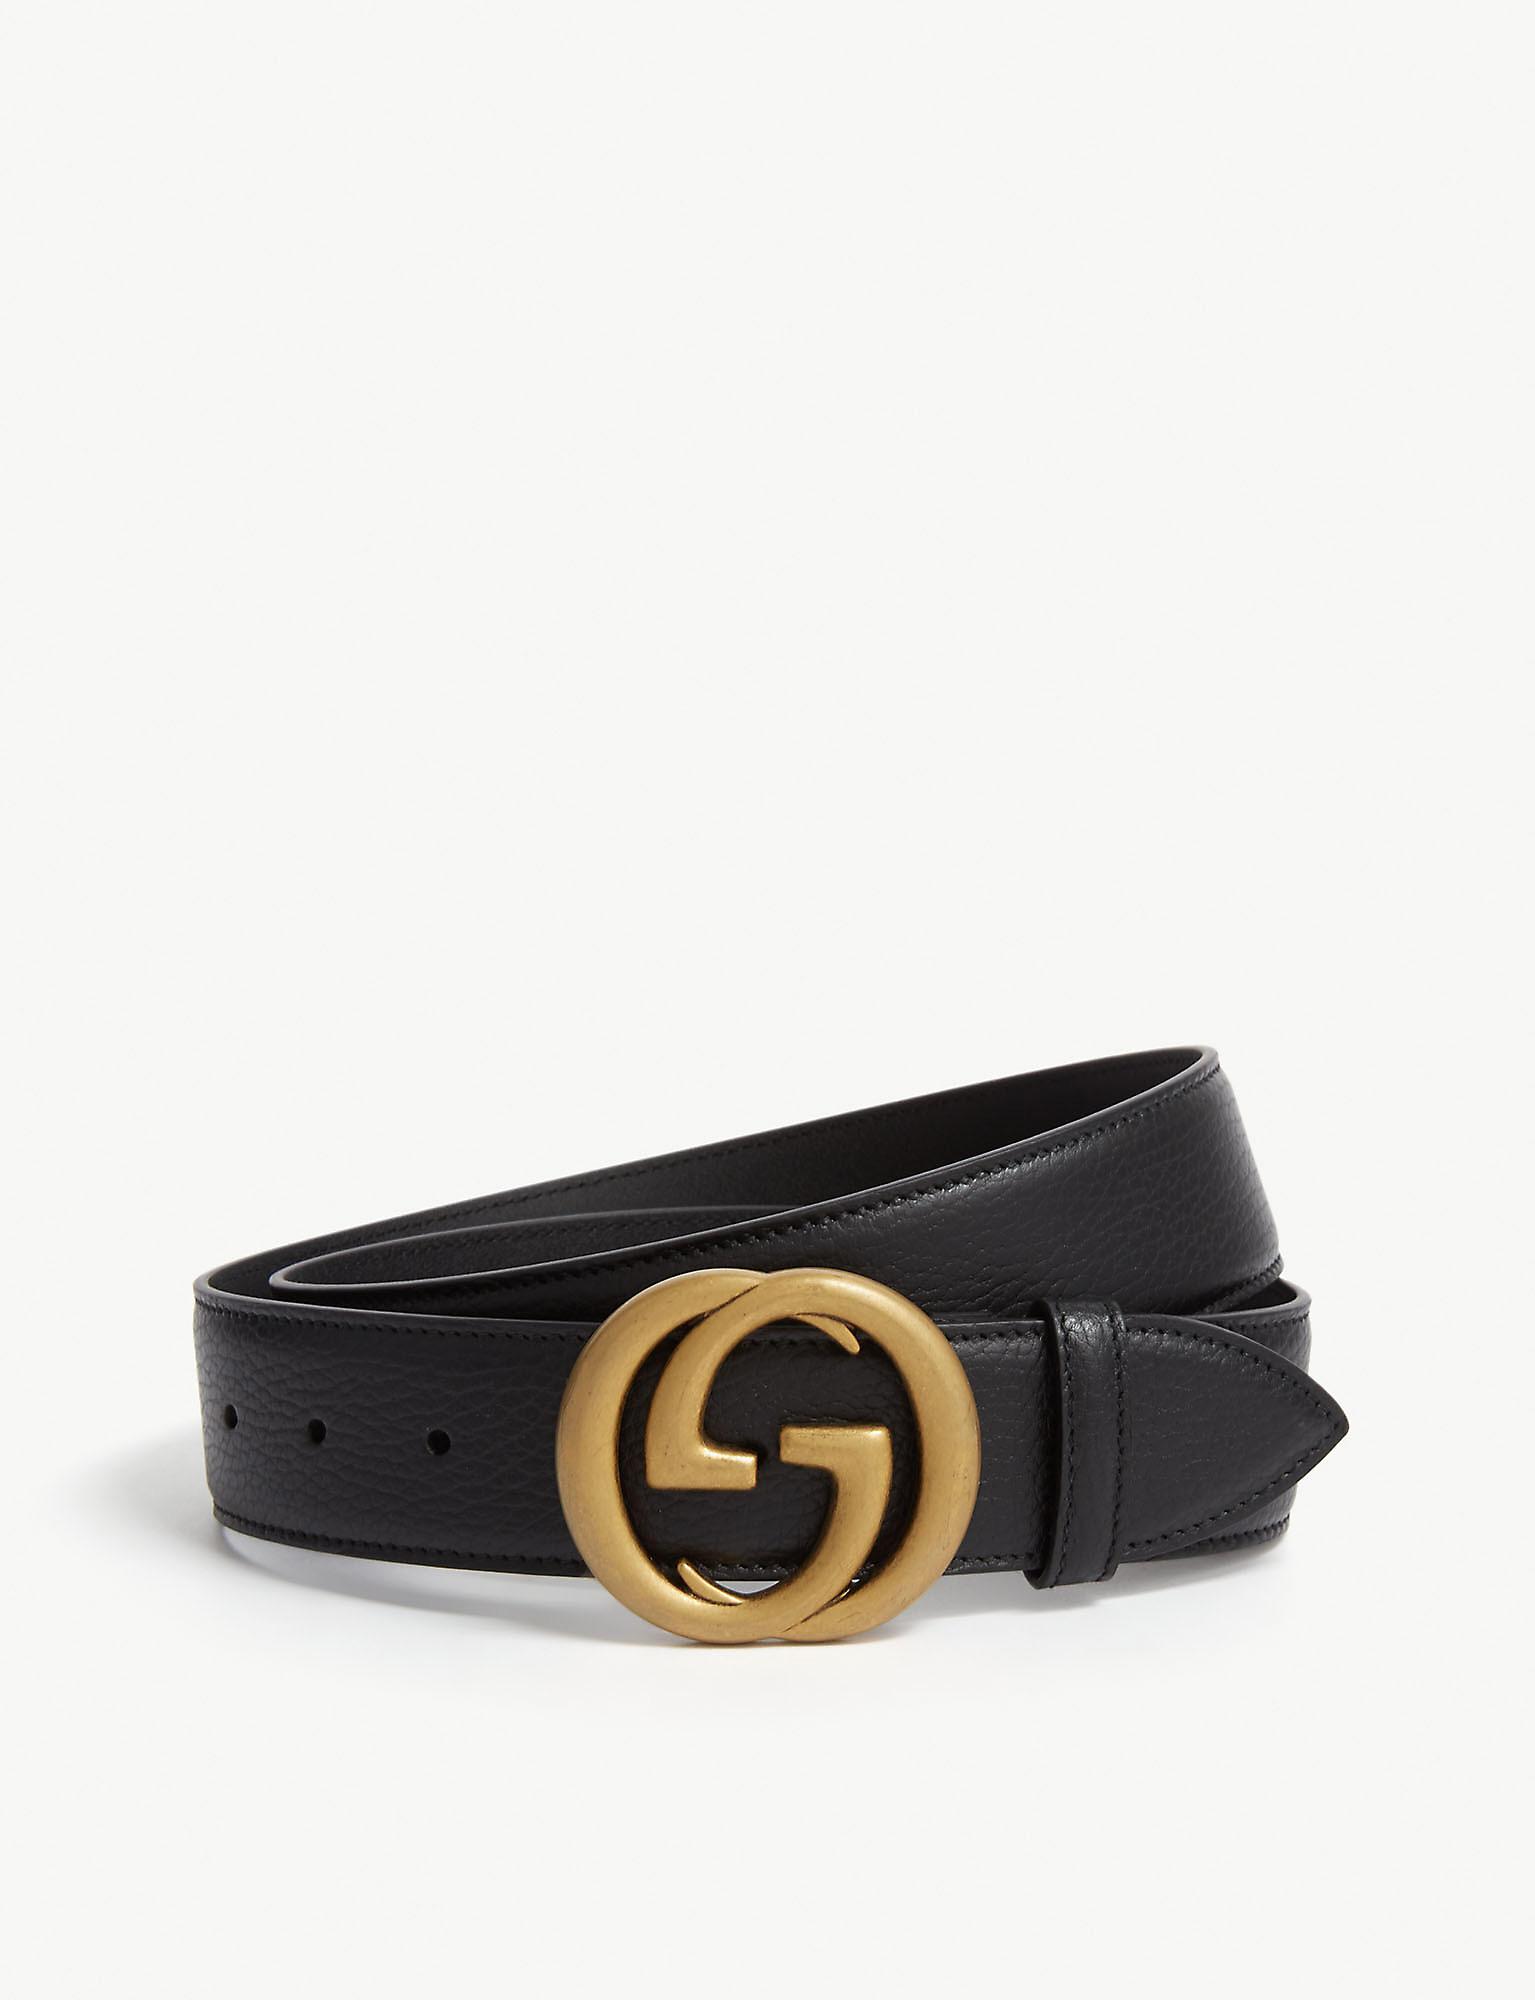 Gucci Leather GG Belt in Black Gold (Black) - Save 37% - Lyst